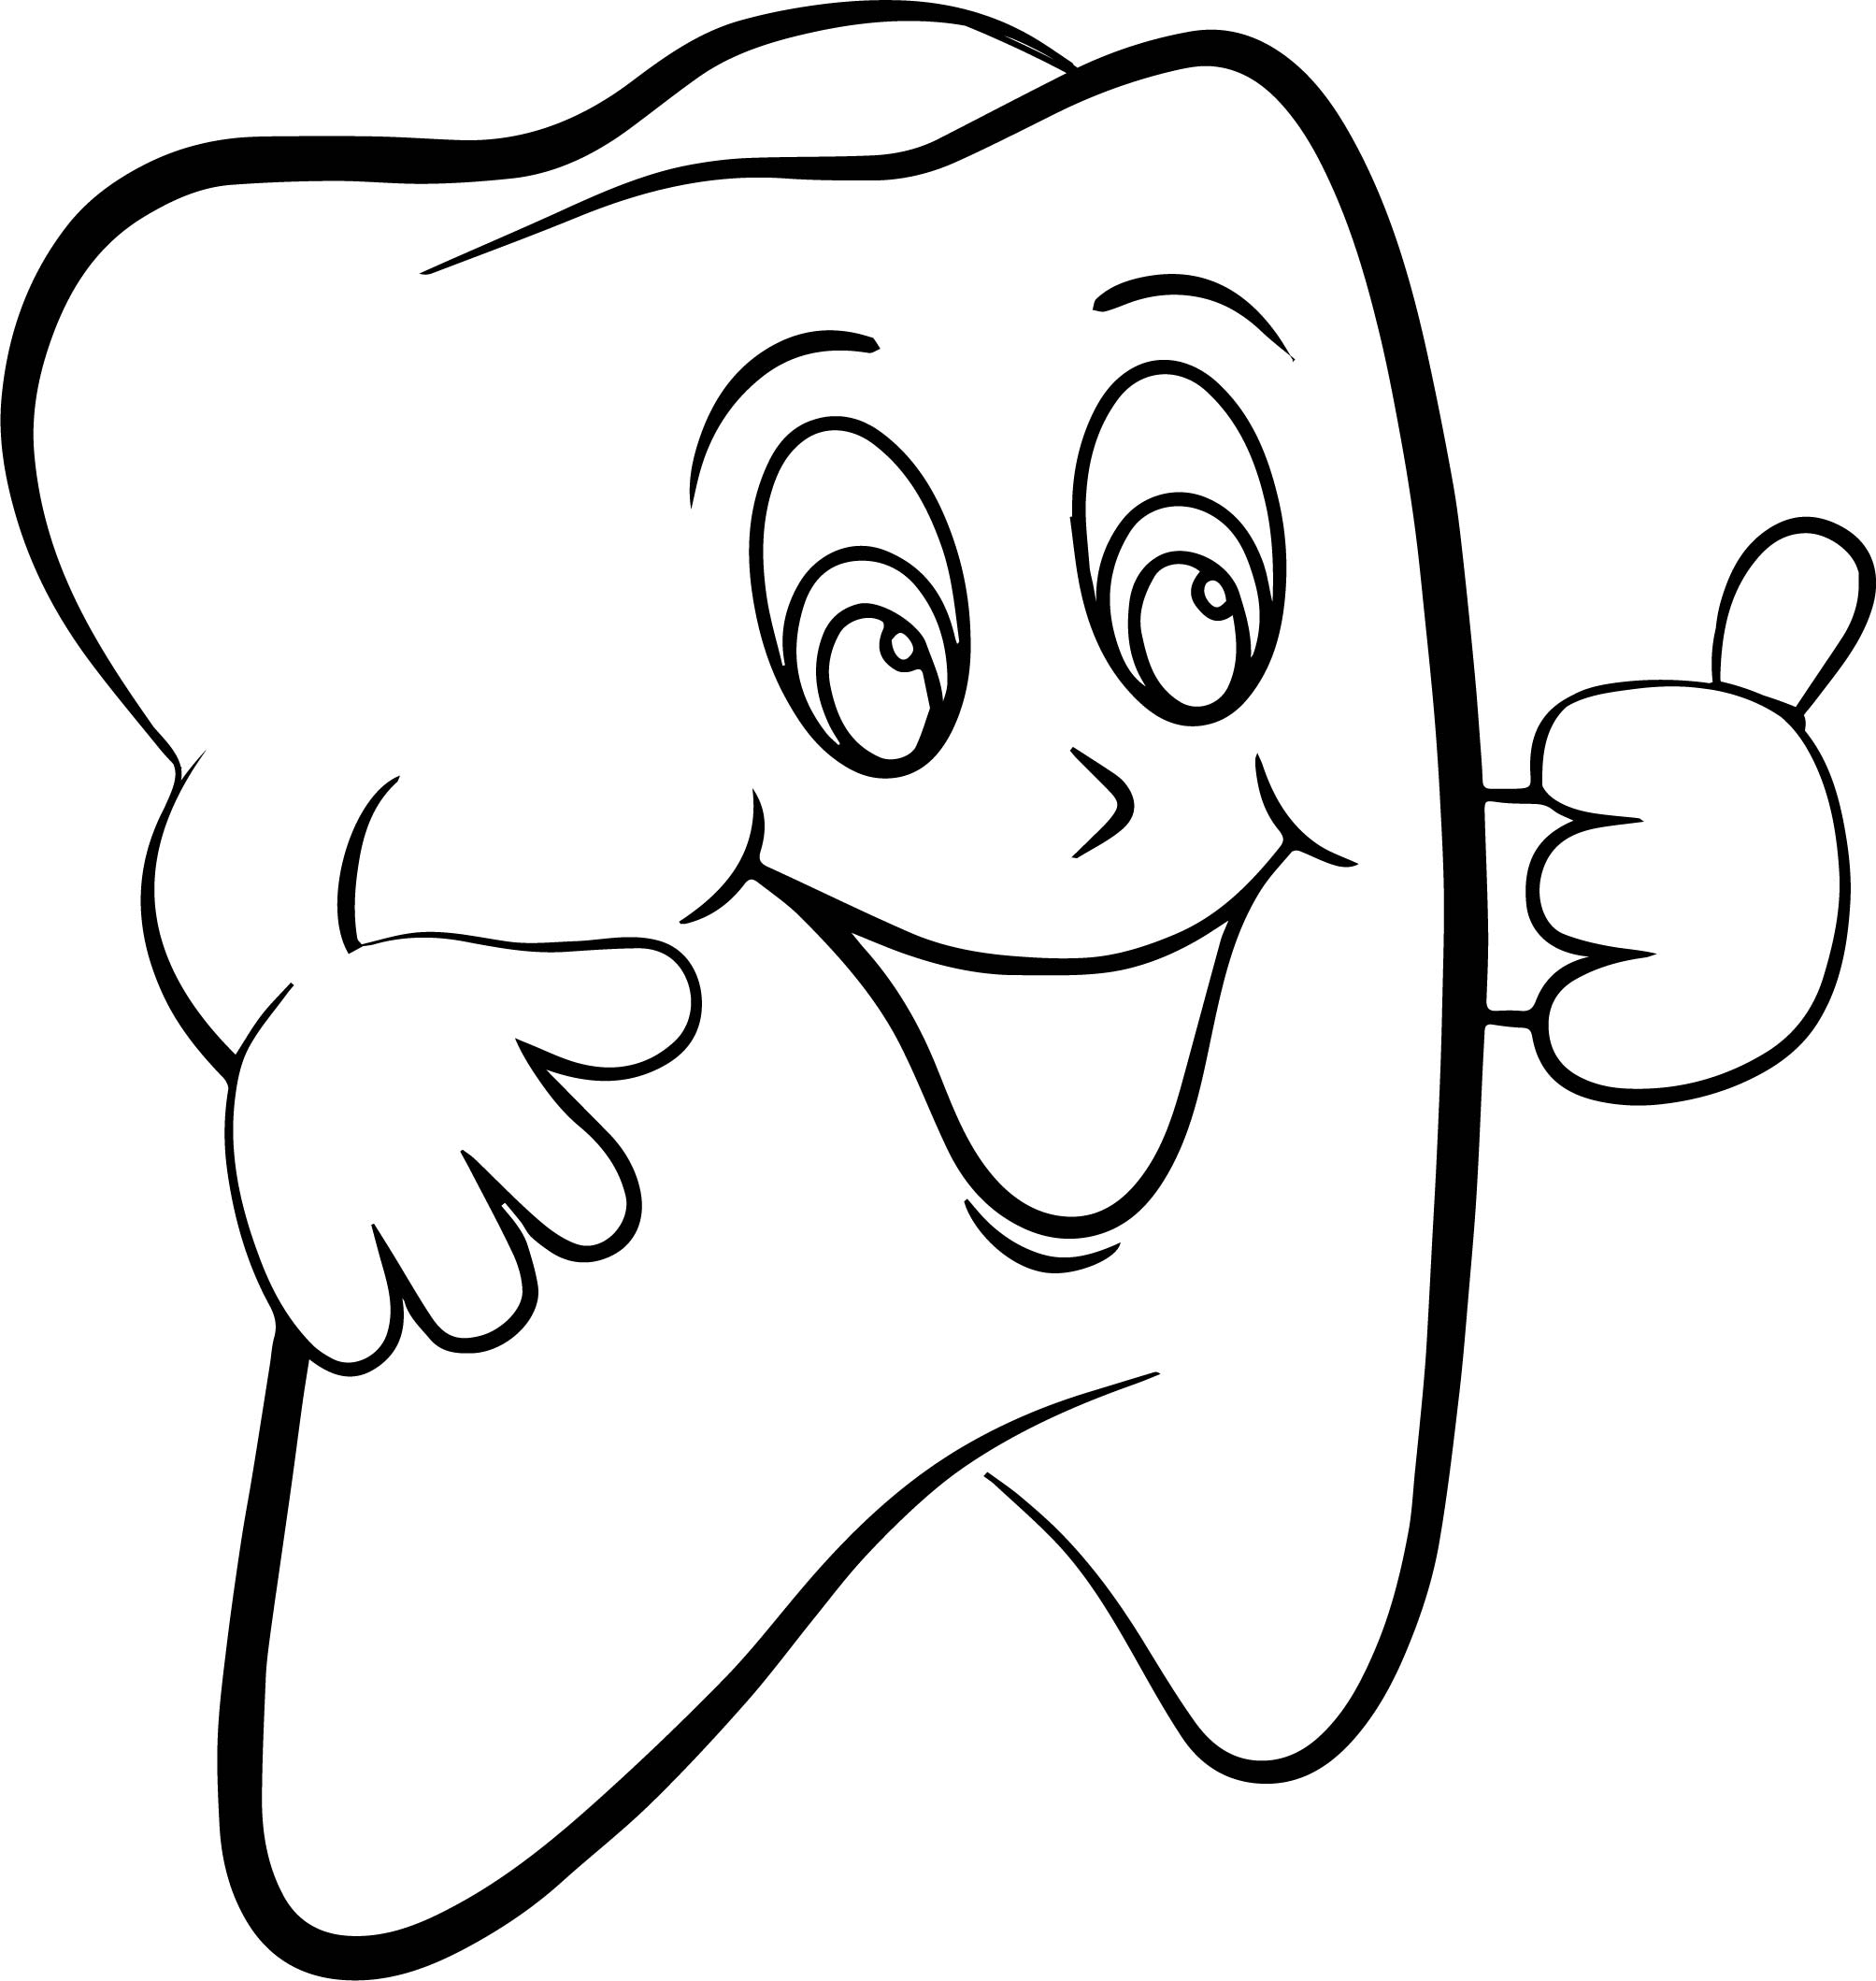 Dental Health Coloring Pages at GetColorings.com | Free ...